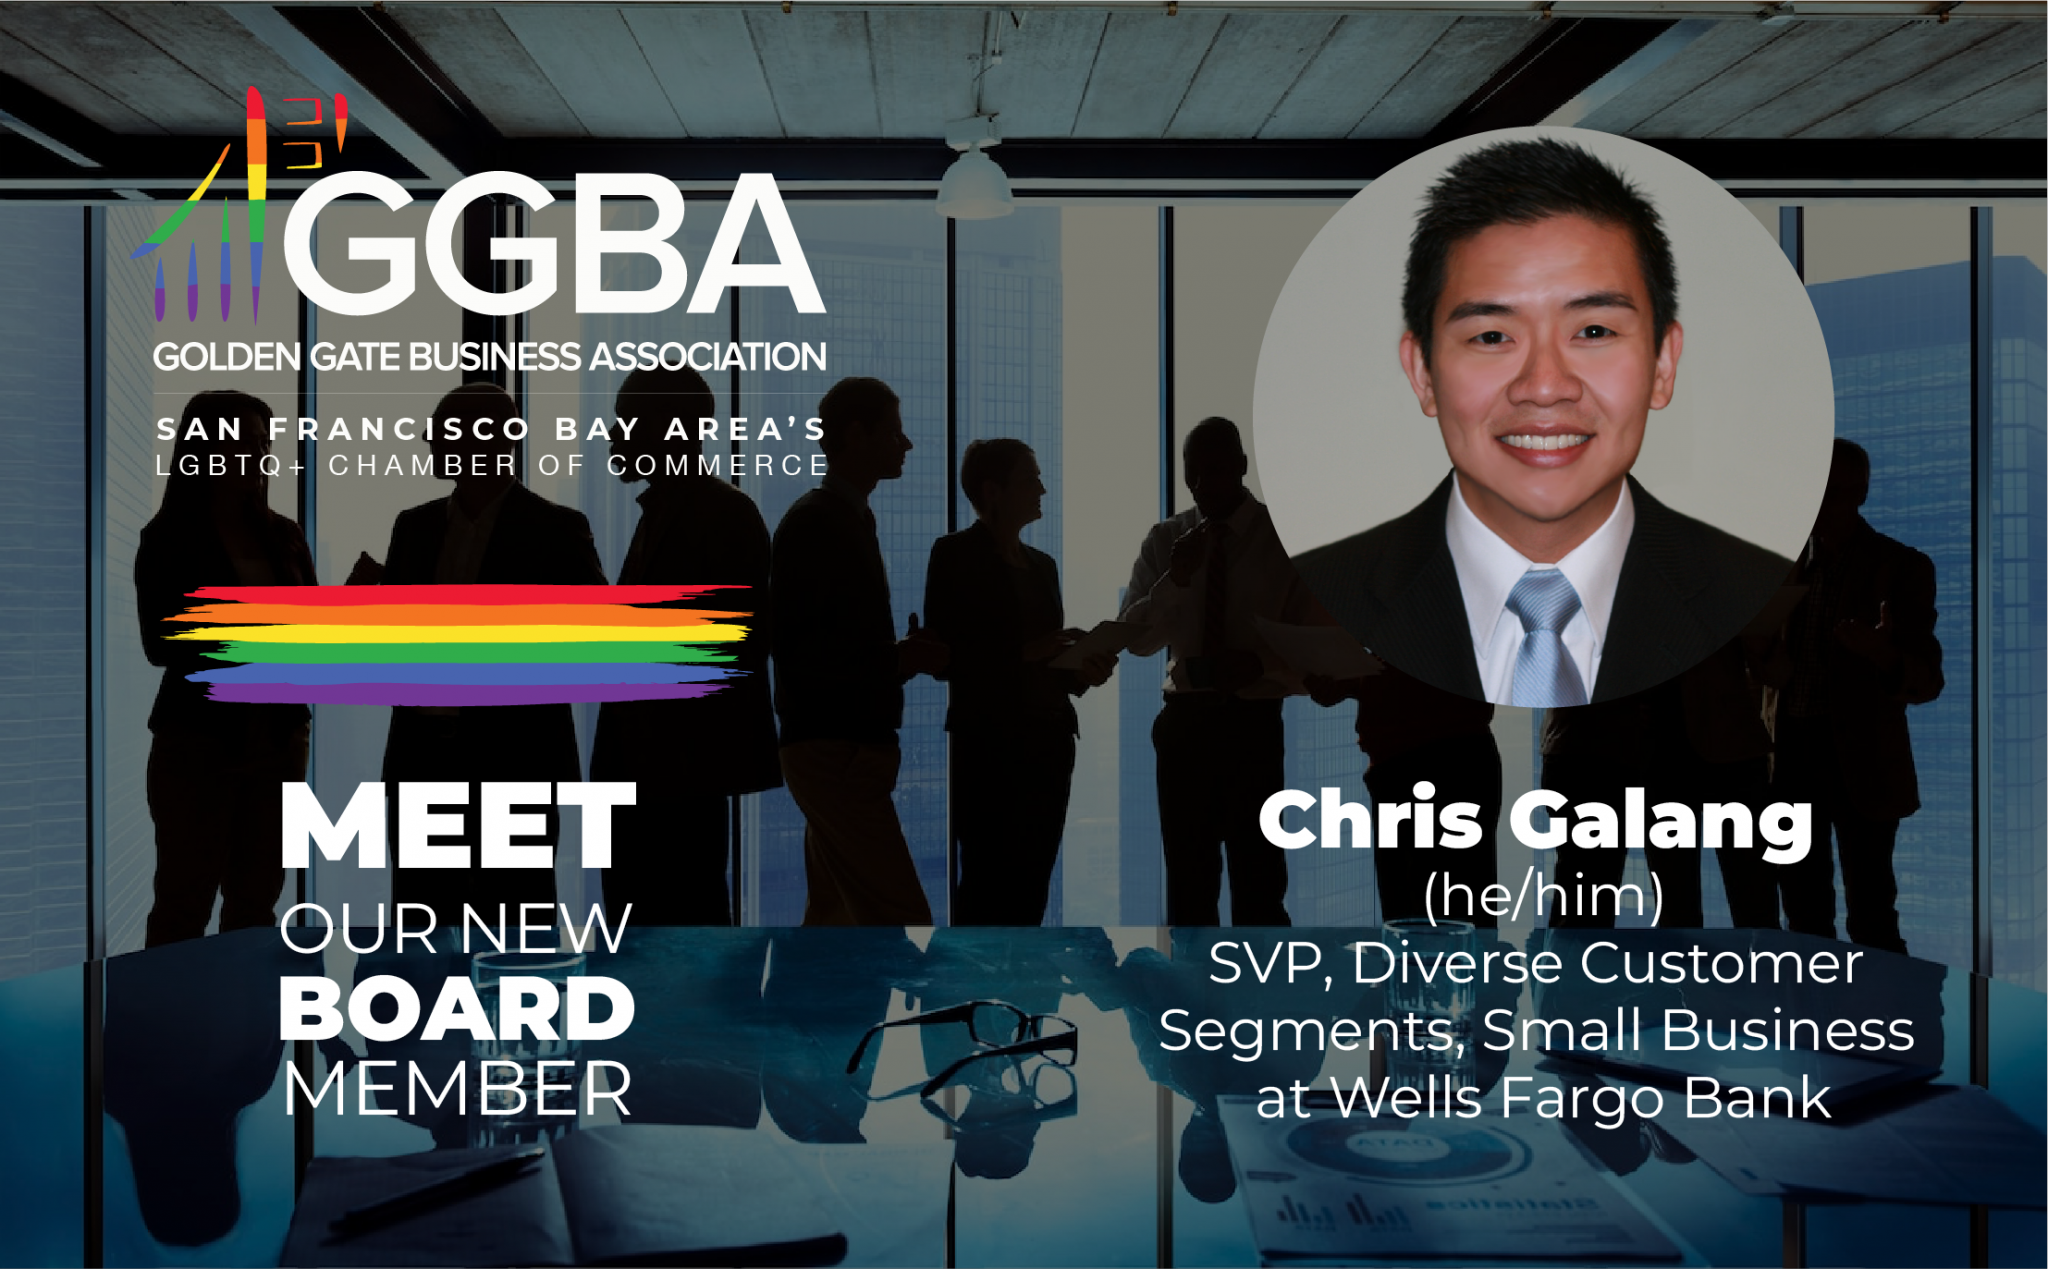 You are currently viewing Meet our new Board Member Chris Galang